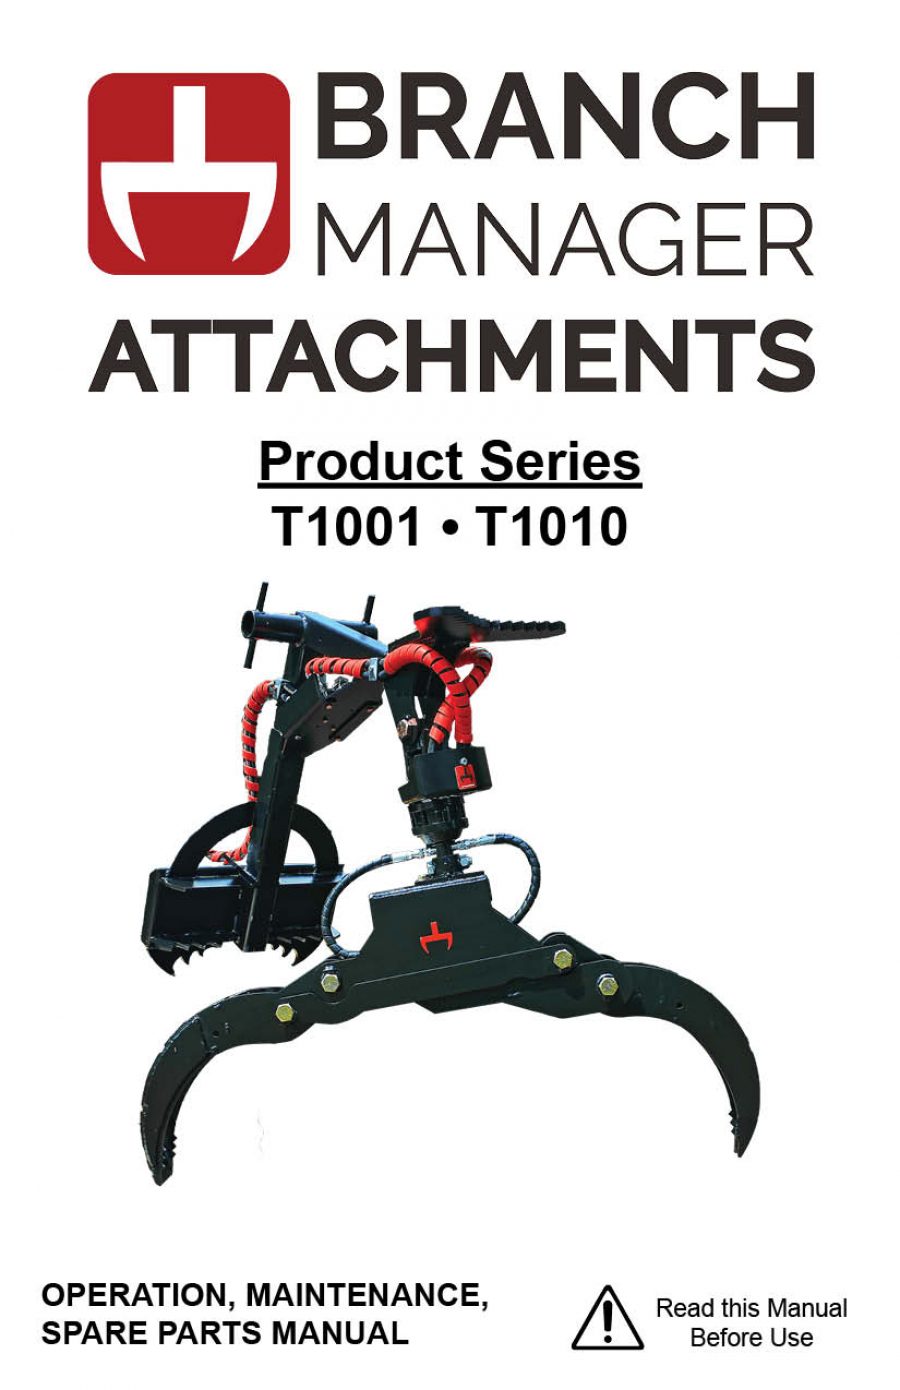 Product Manual_T1001_T1010_Branch Manager Attachments_Thumbnail